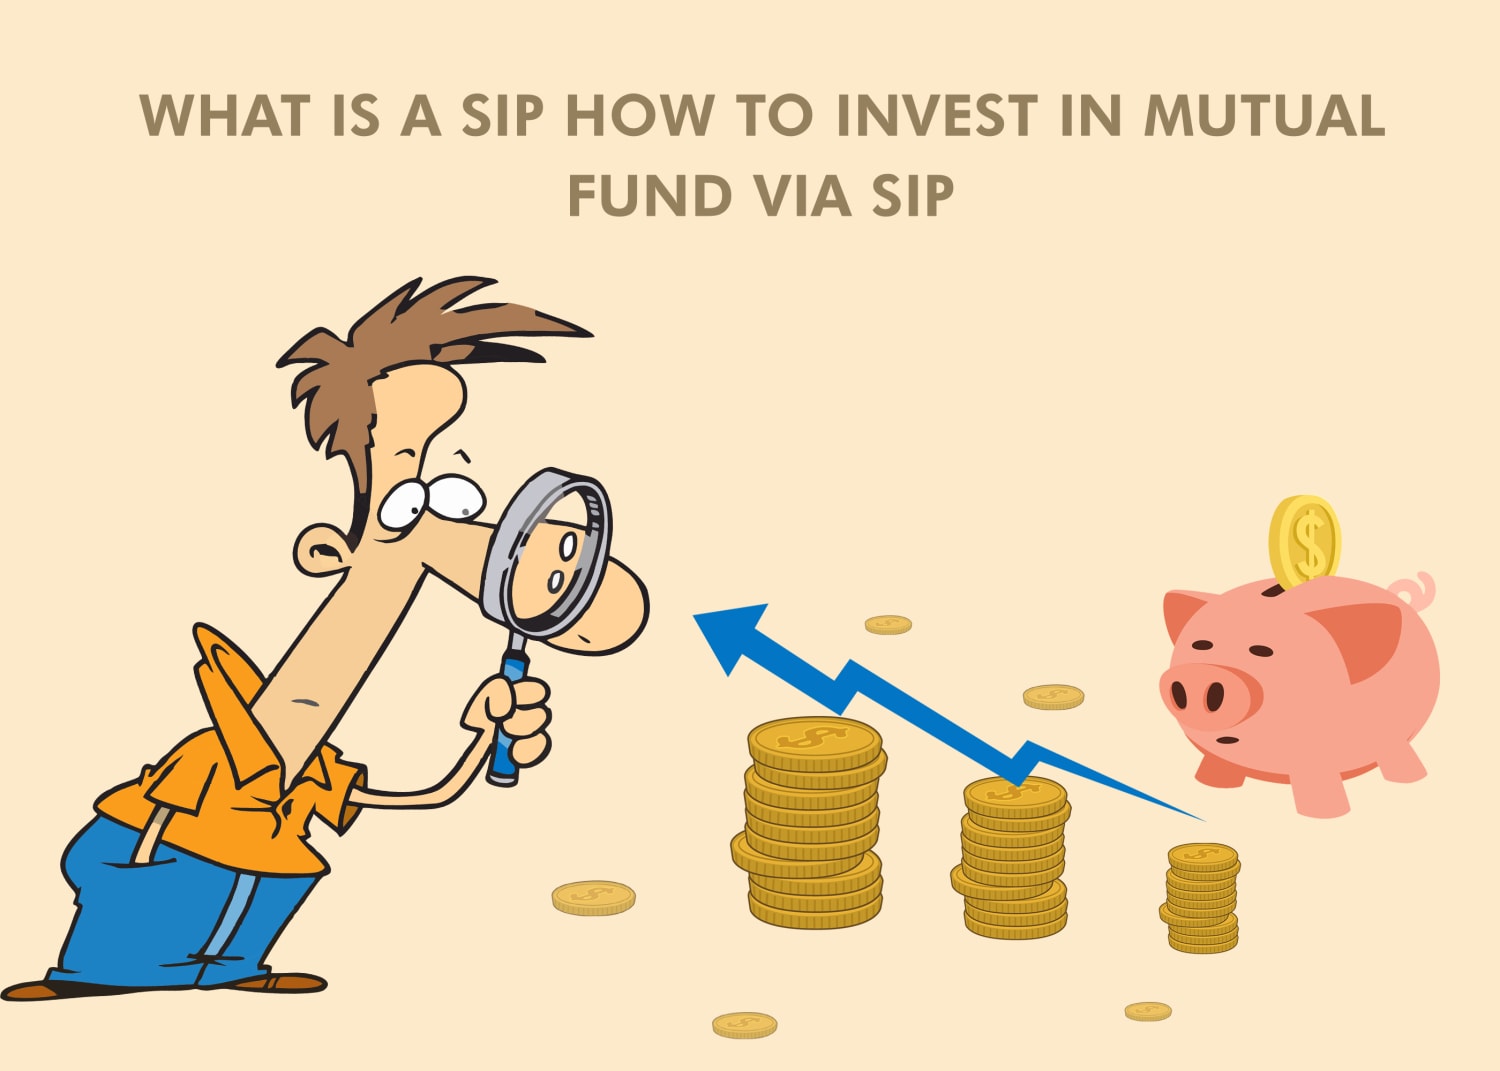 SIP Plans: Investing in Mutual Fund Through SIP